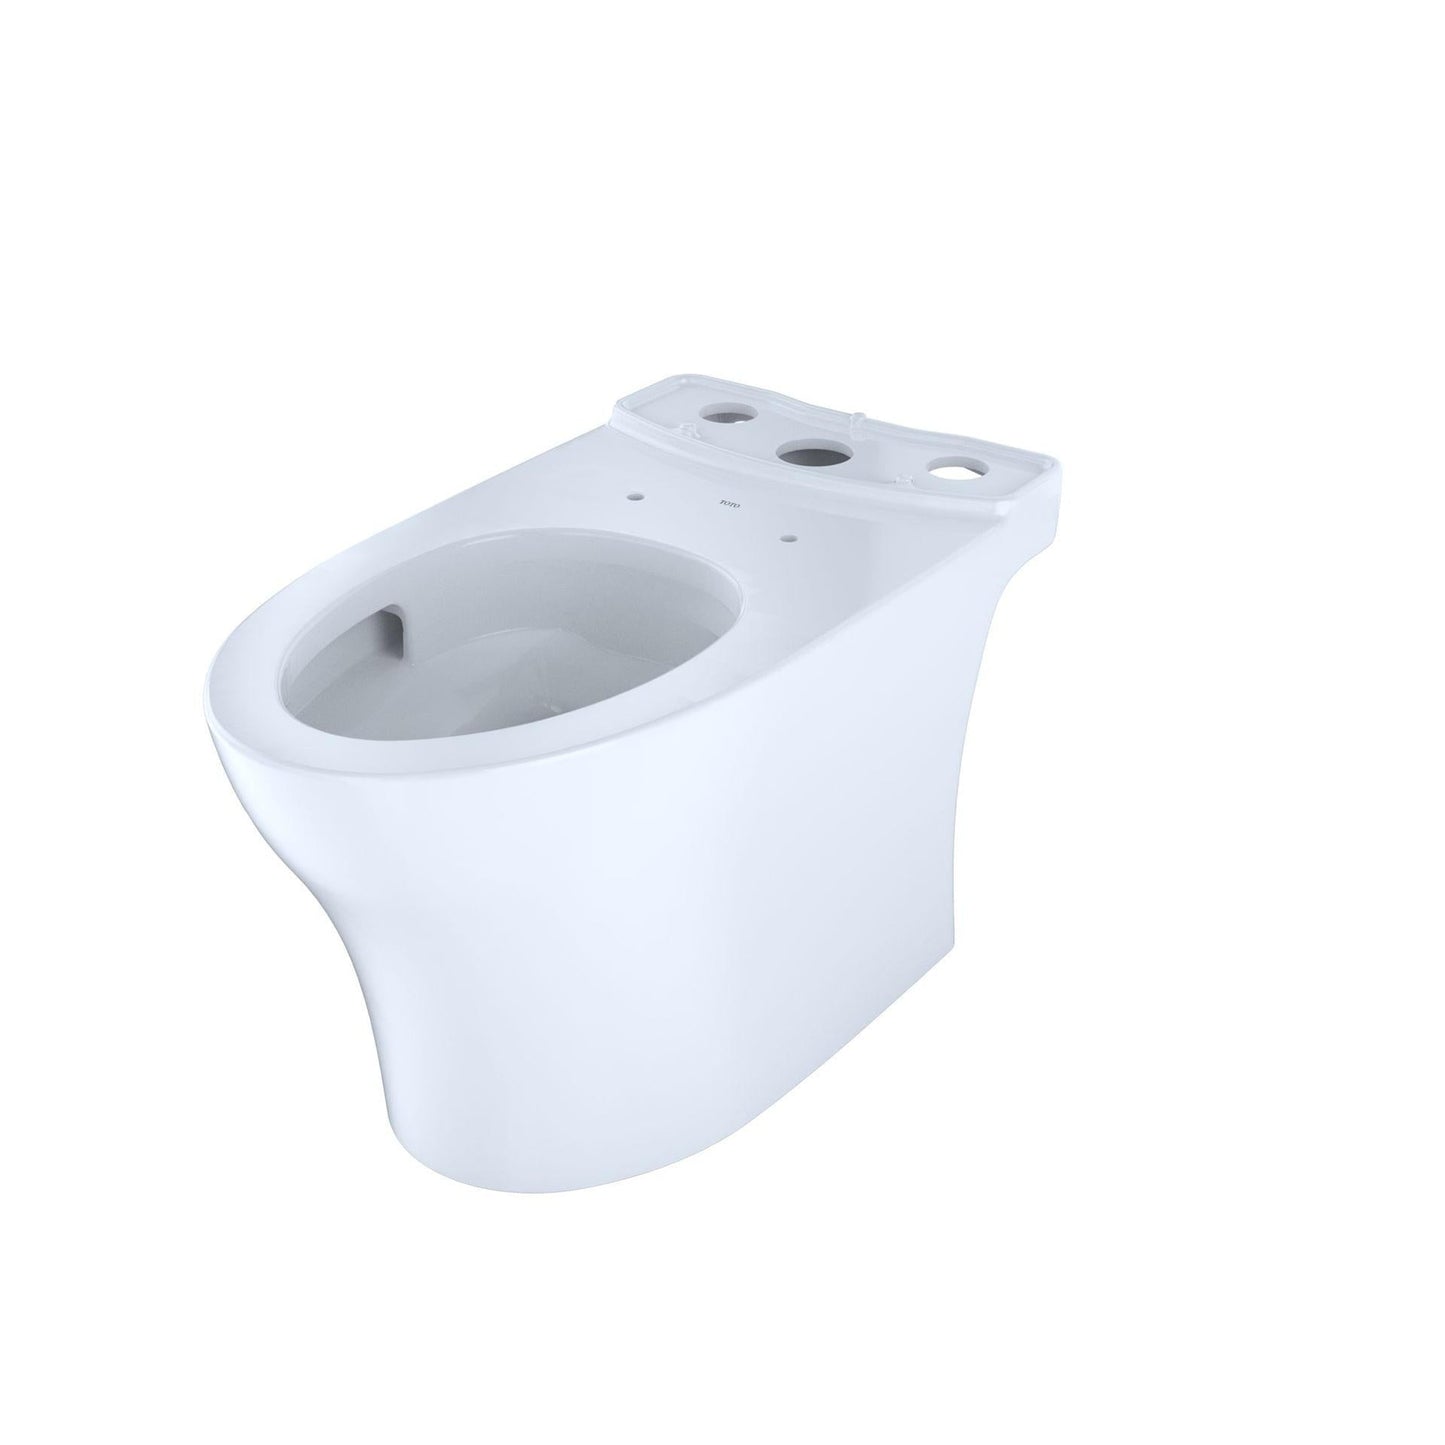 TOTO Aquia IV Cotton White 1.0 GPF & 0.8 GPF Dual-Flush Two-Piece Elongated Chair Height Toilet With WASHLET+ Connection - Slim SoftClose Seat Included